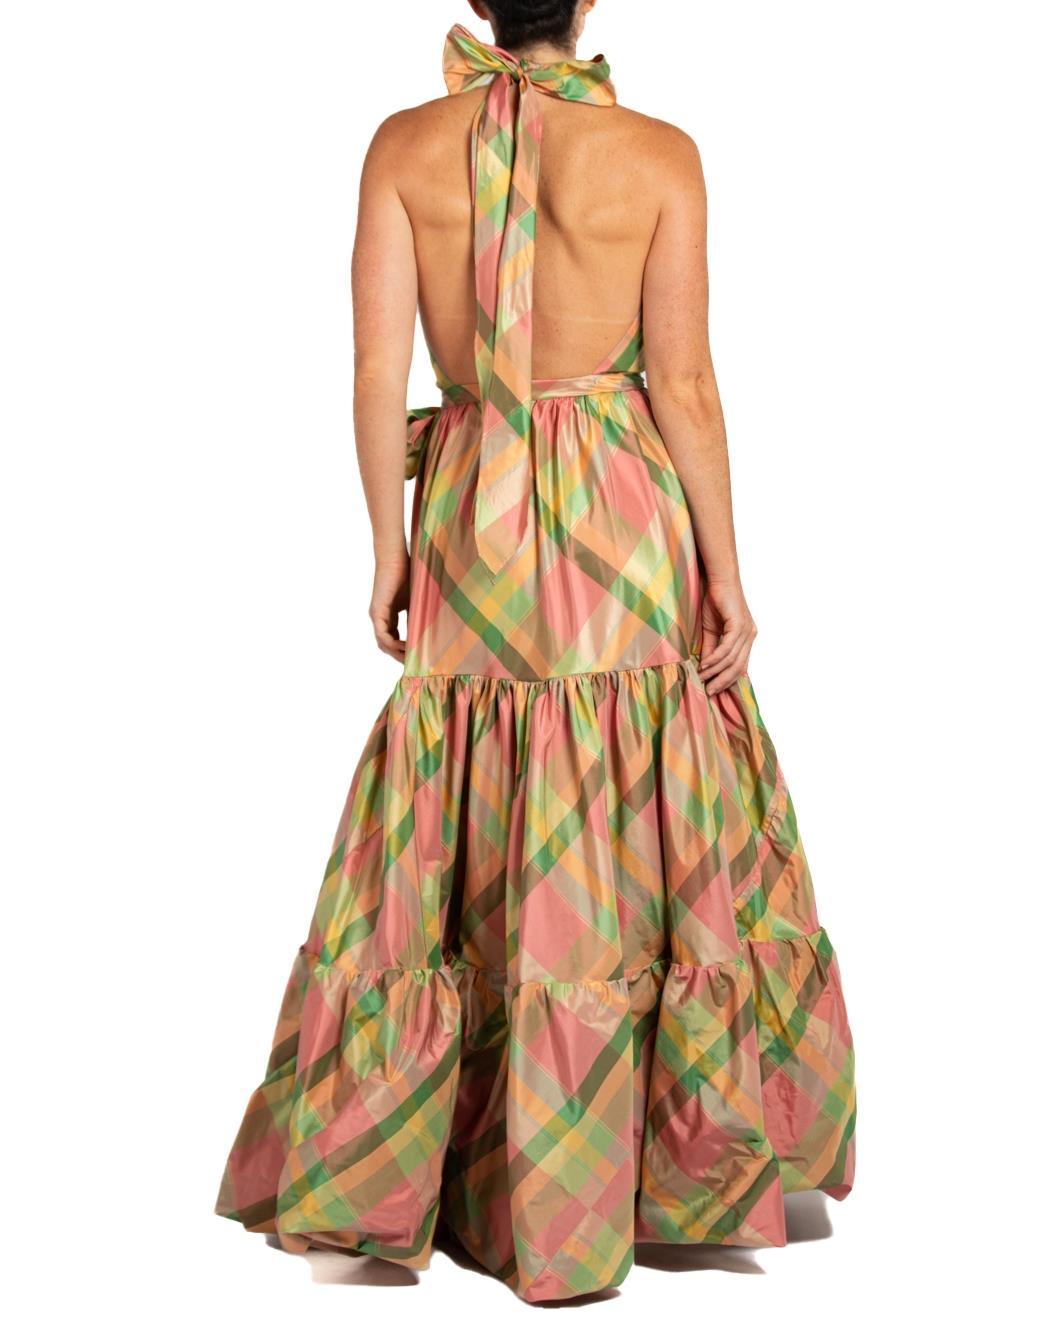 MORPHEW COLLECTION Pink & Green Silk Taffeta Plaid Gown For Sale 1